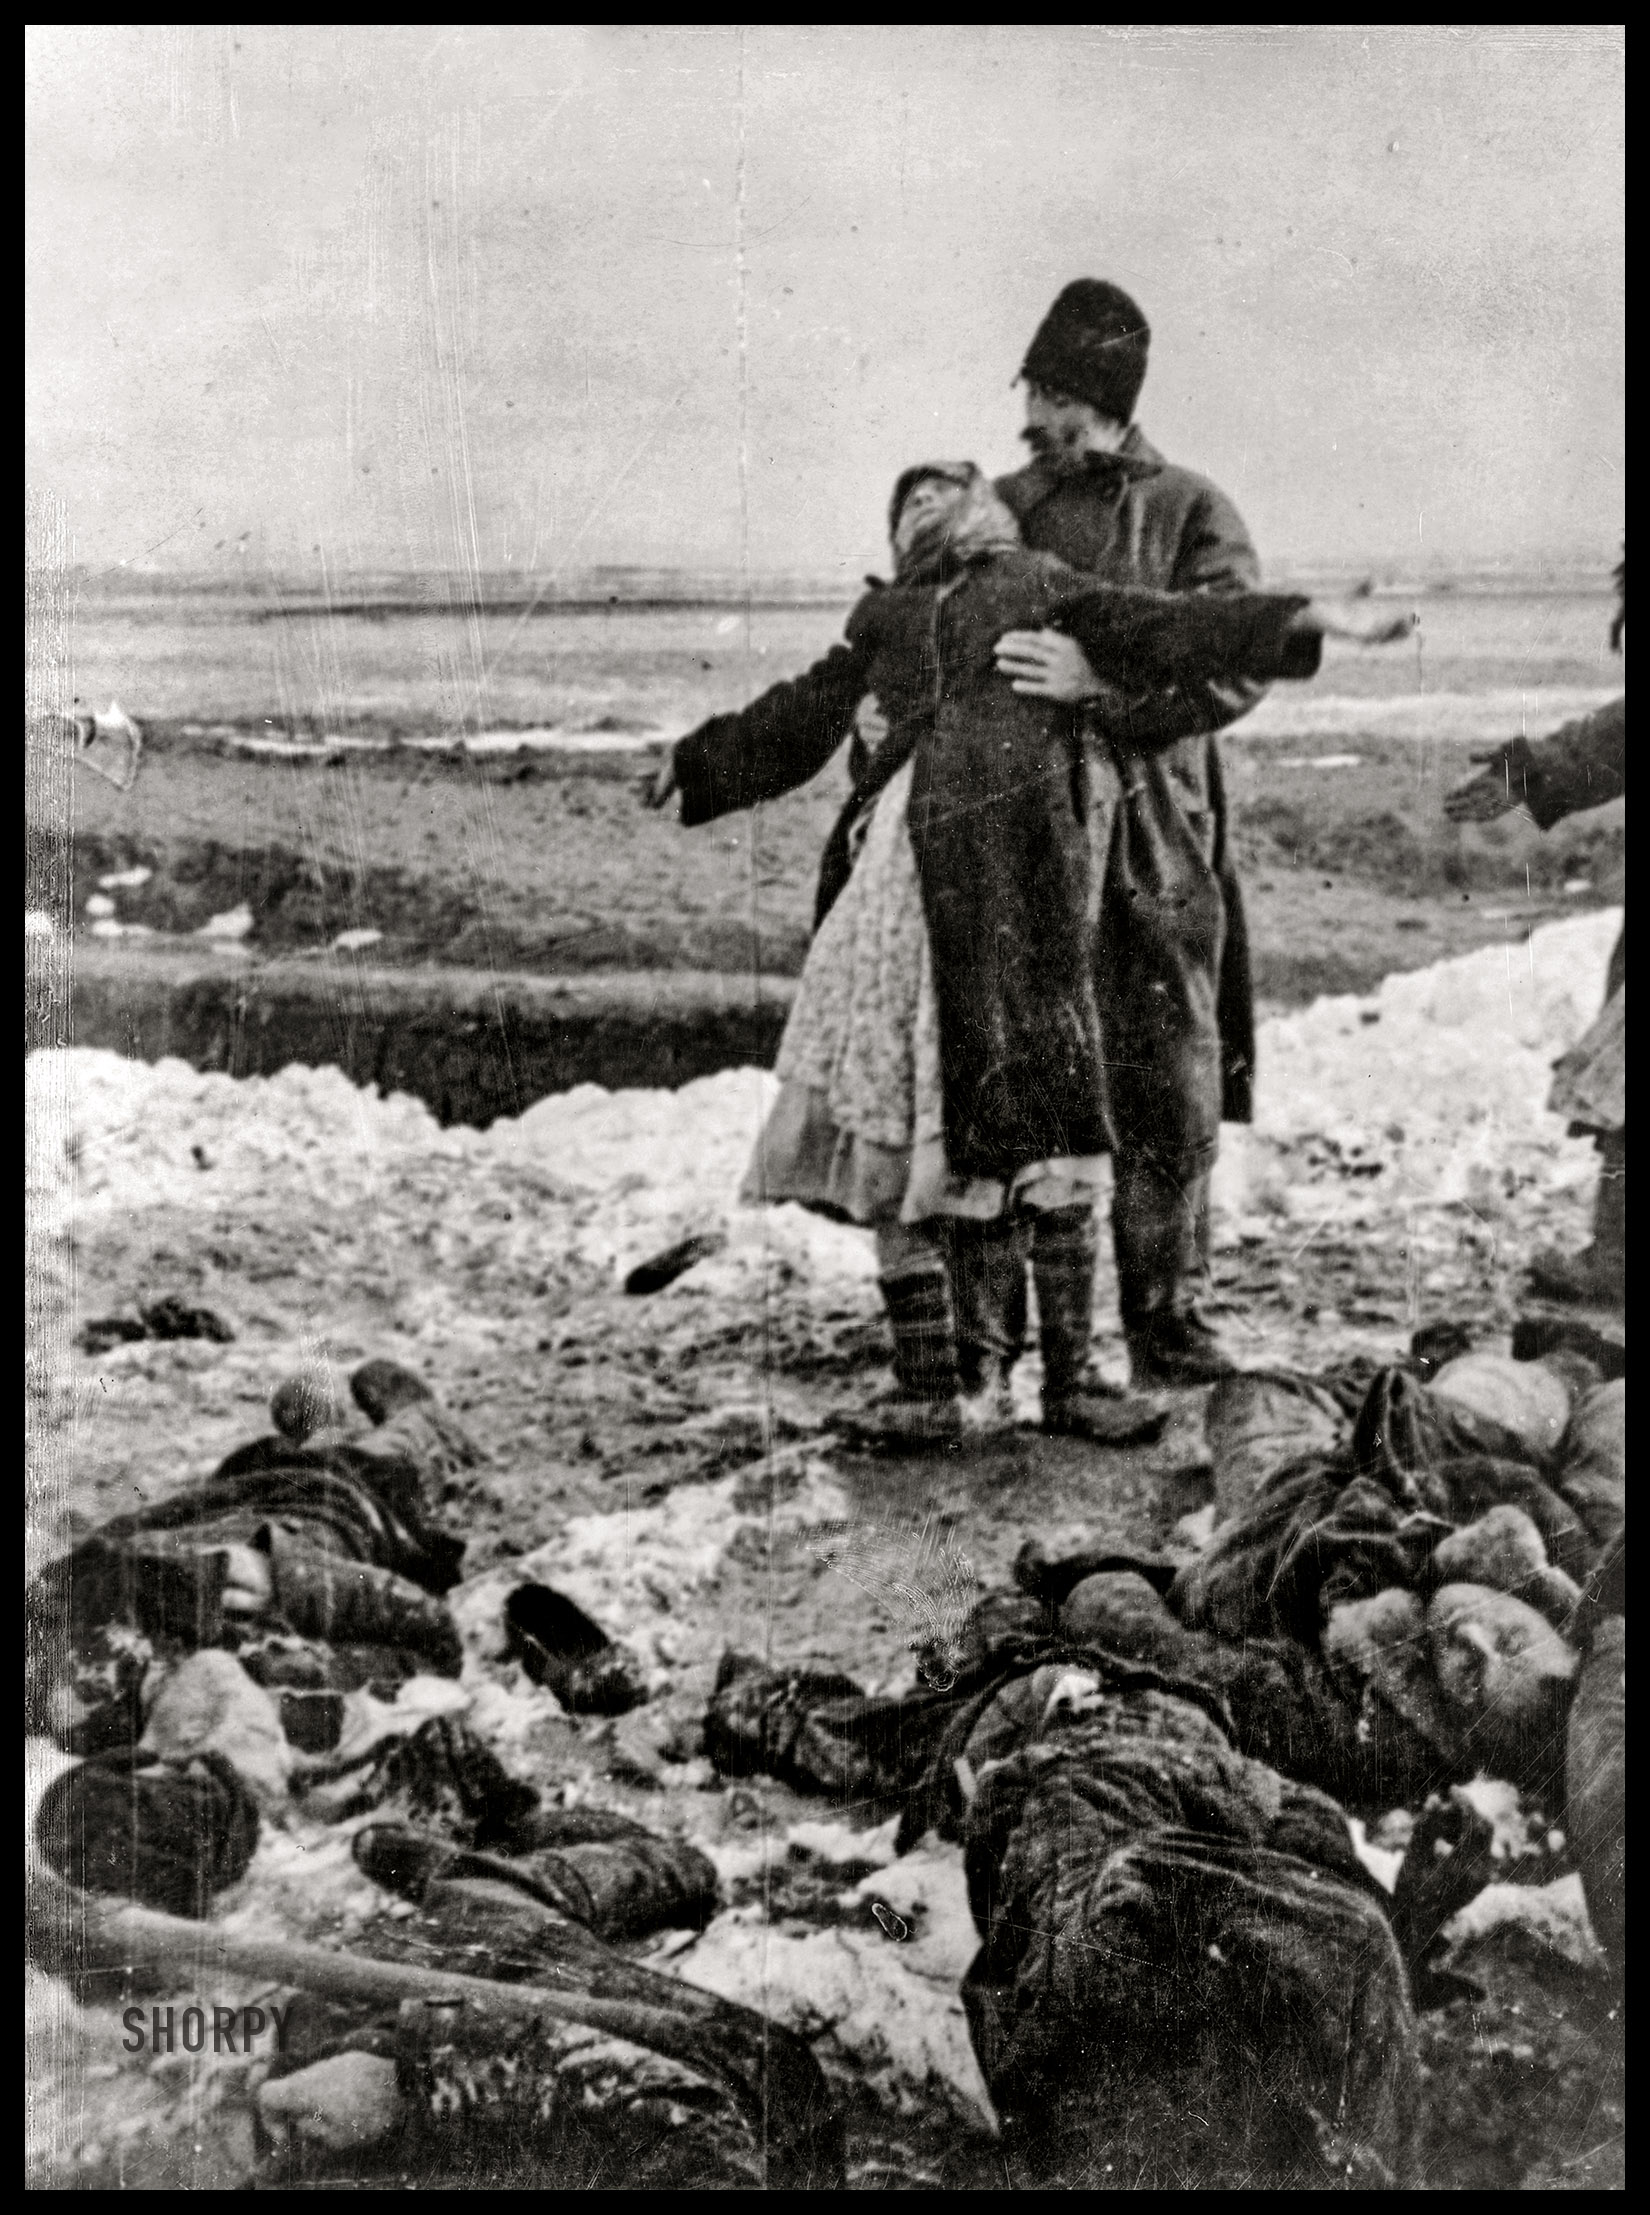 January 1942. Kerch Peninsula, Ukraine. "Parents find the body of their murdered son in Kerch. Photograph shows mother with arms outstretched, leaning back against husband while dead bodies lie at their feet." U.S. Office for Emergency Management photoprint -- British Official Photo (German War Crimes -- Hitler -- World War II). View full size.